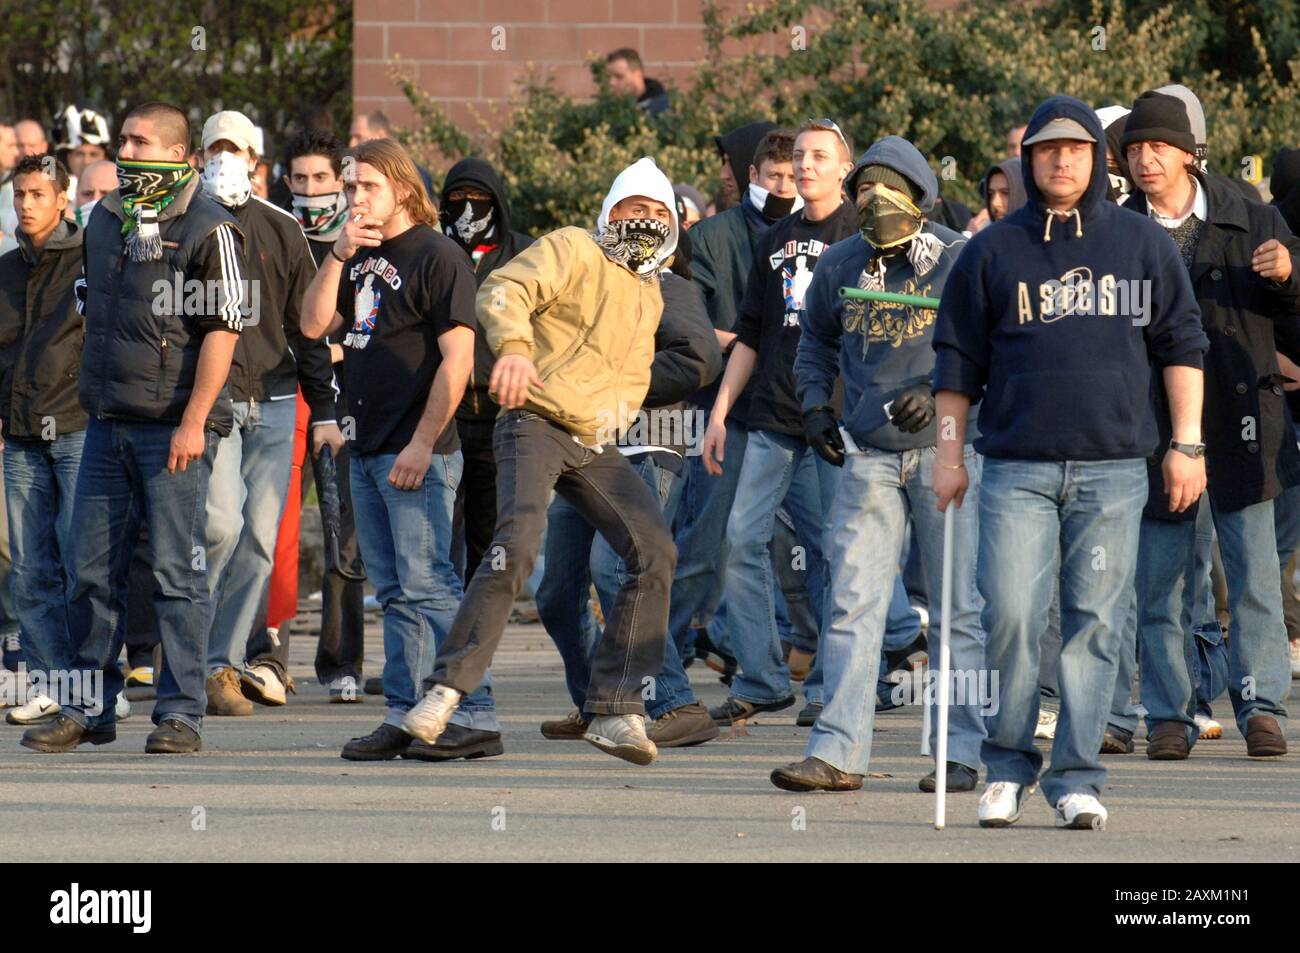 Juventus Football fans clash with Liverpool fans and police when the two teams met in Turin in 2005. It was the first clash since the Heysel stadium disaster in 1985 when 39 people lost their lives. Stock Photo